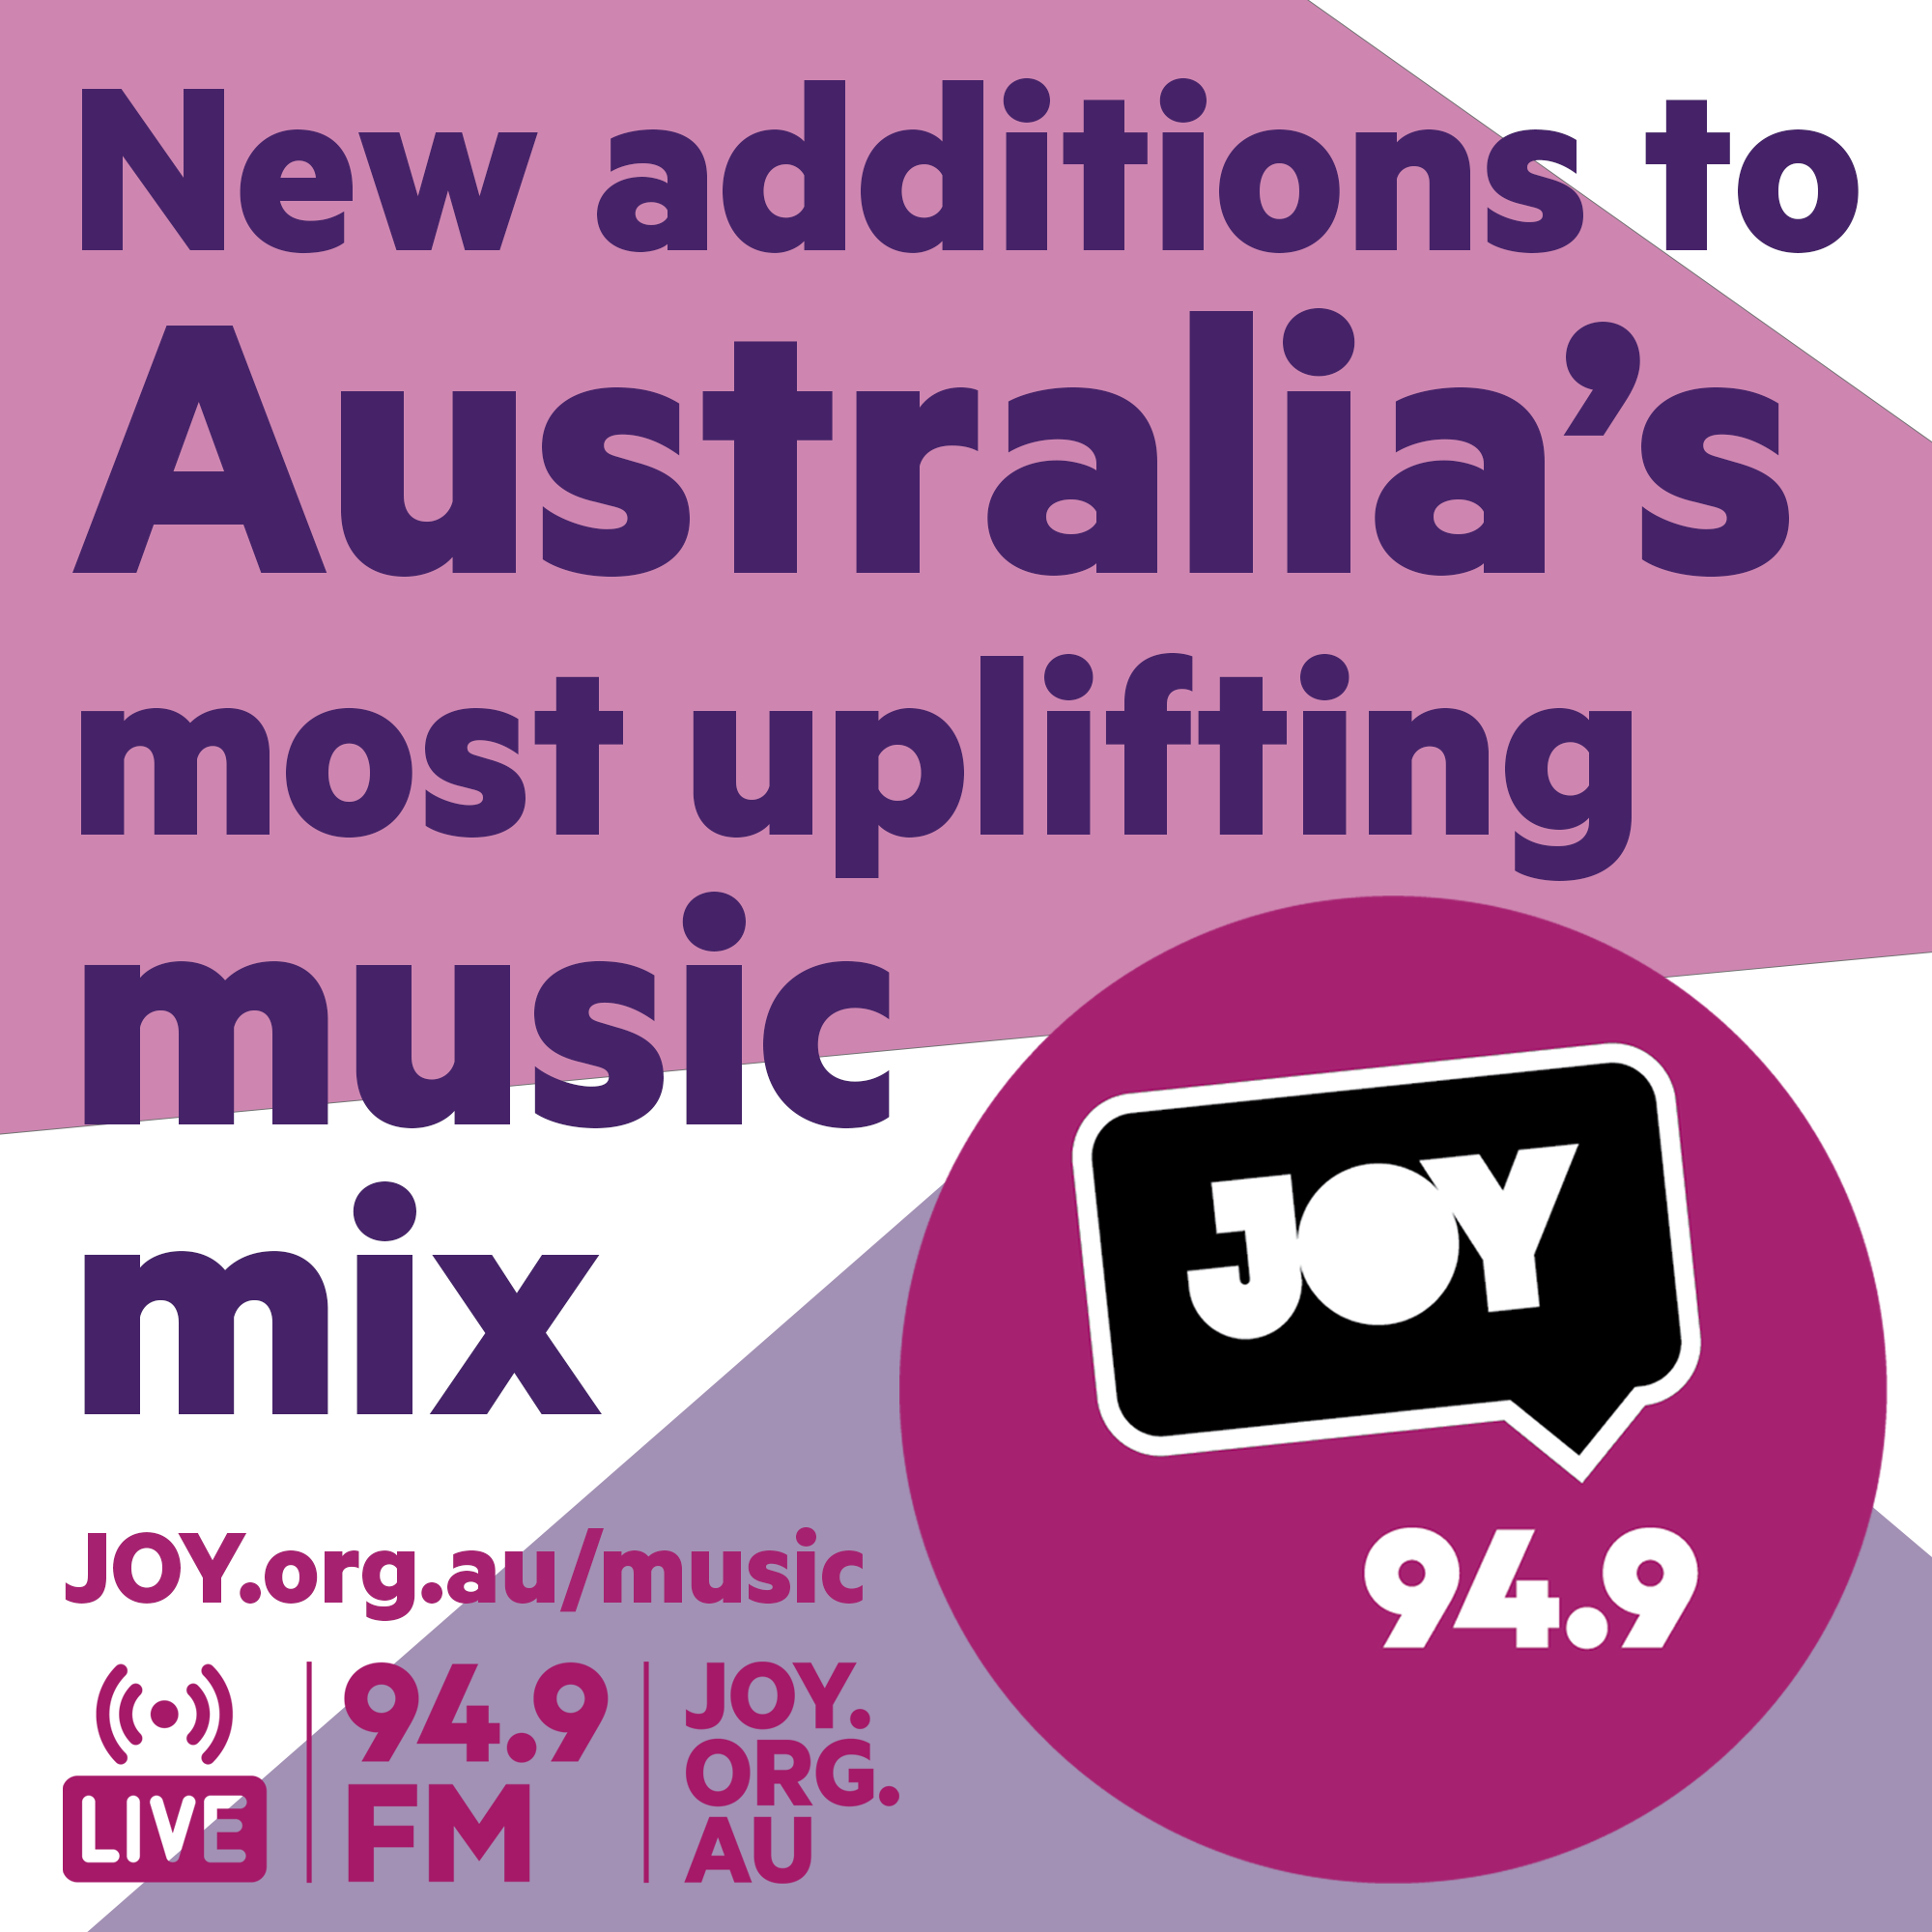 The newest songs to Australia’s most uplifting music mix: 2 February 2022